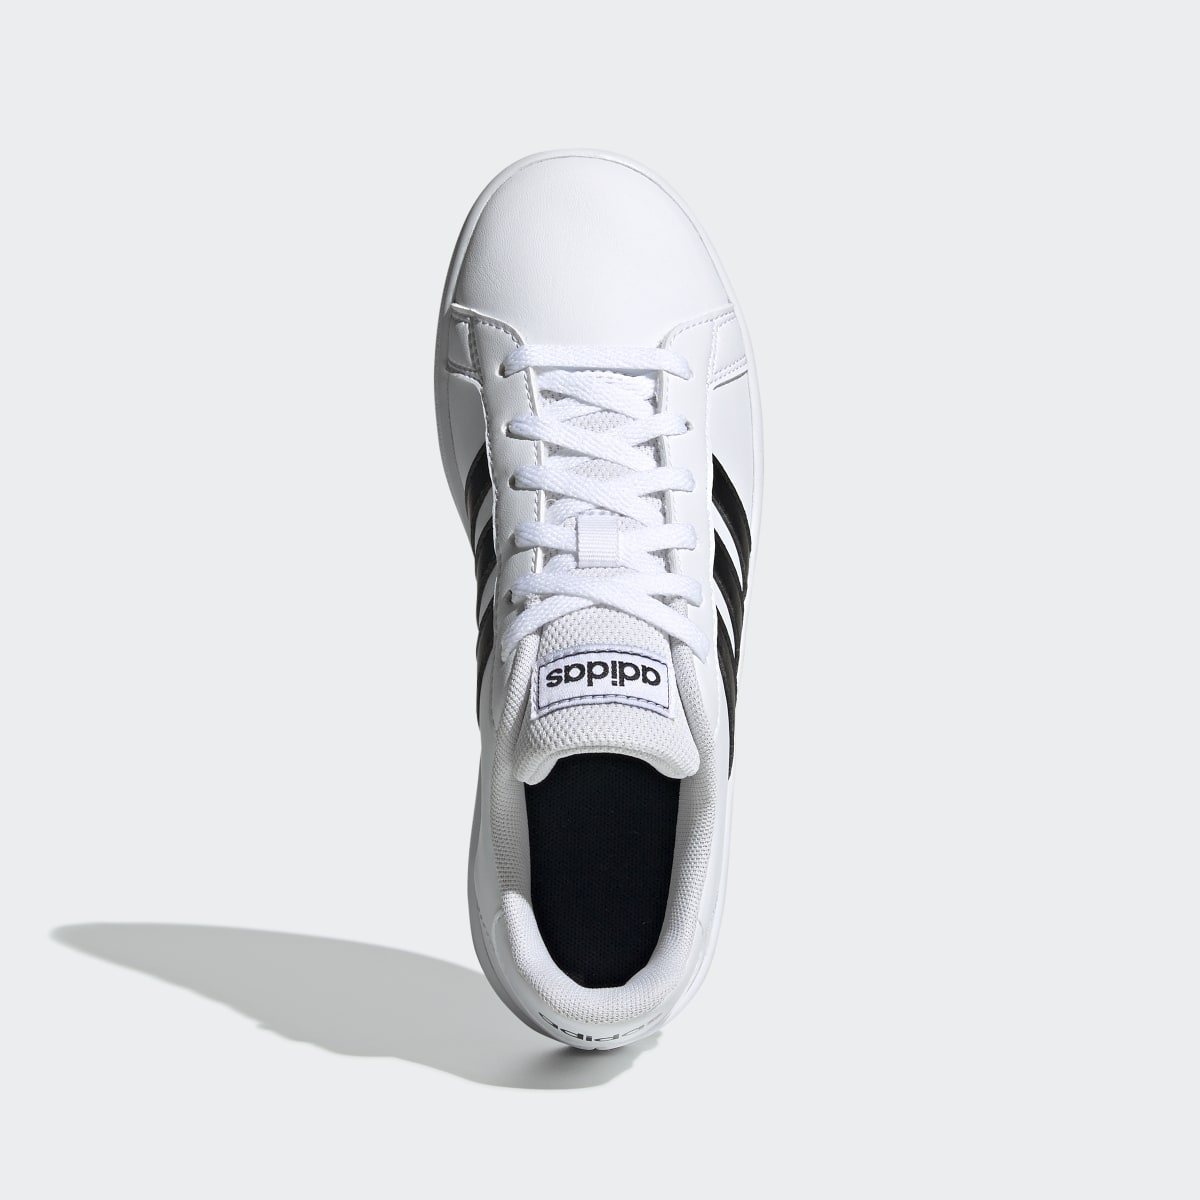 Adidas Grand Court Shoes. 4